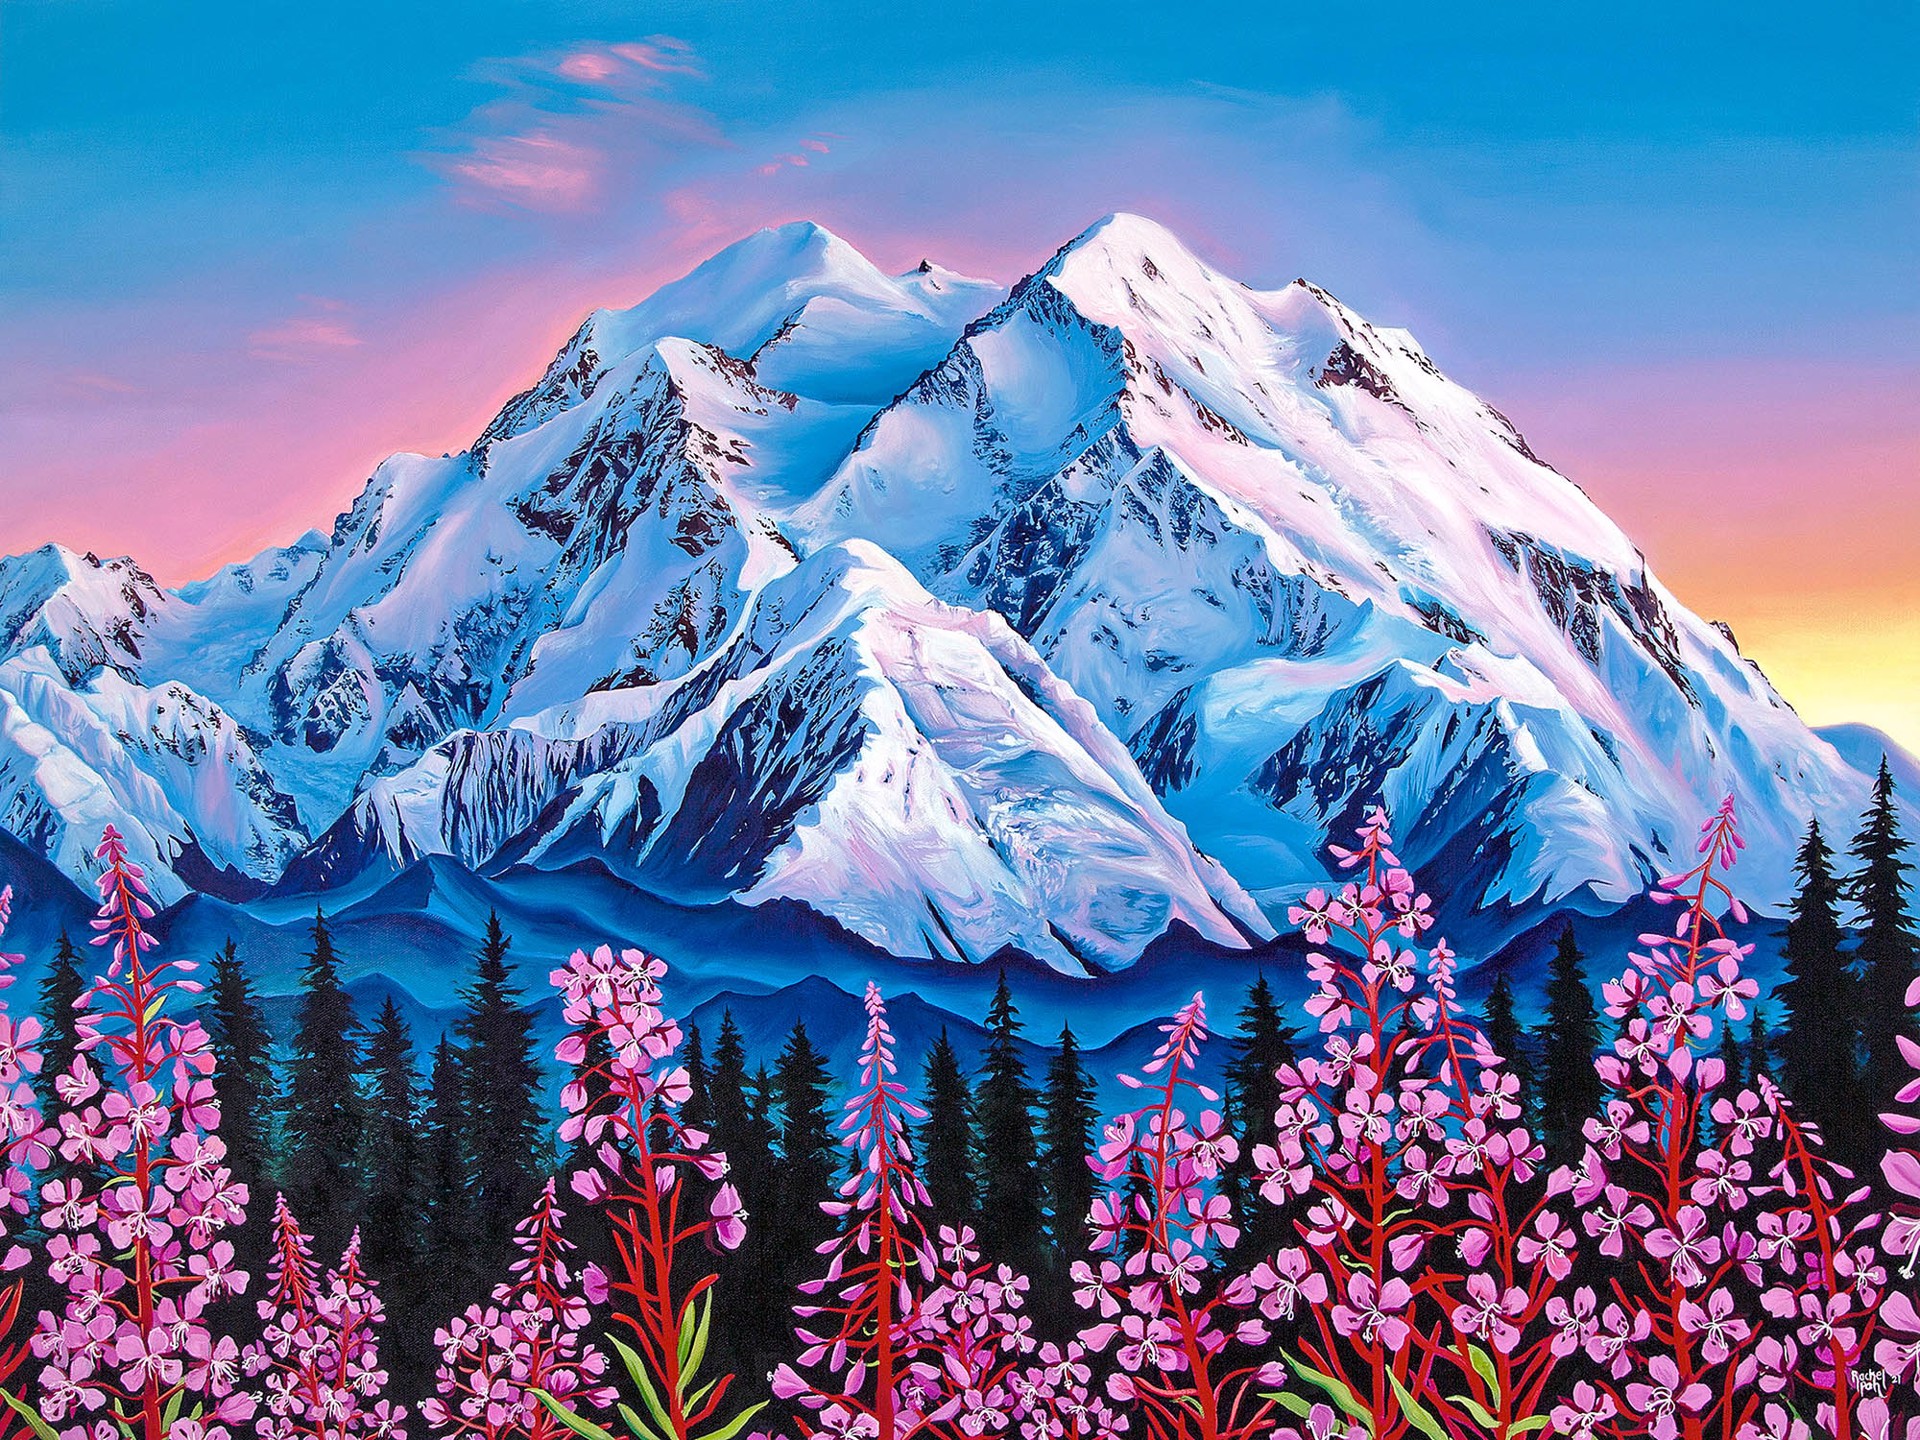 Original Oil Painting Featuring A Snow-covered Mountain Peak Over Sunset Sky With Fireweed In Foreground